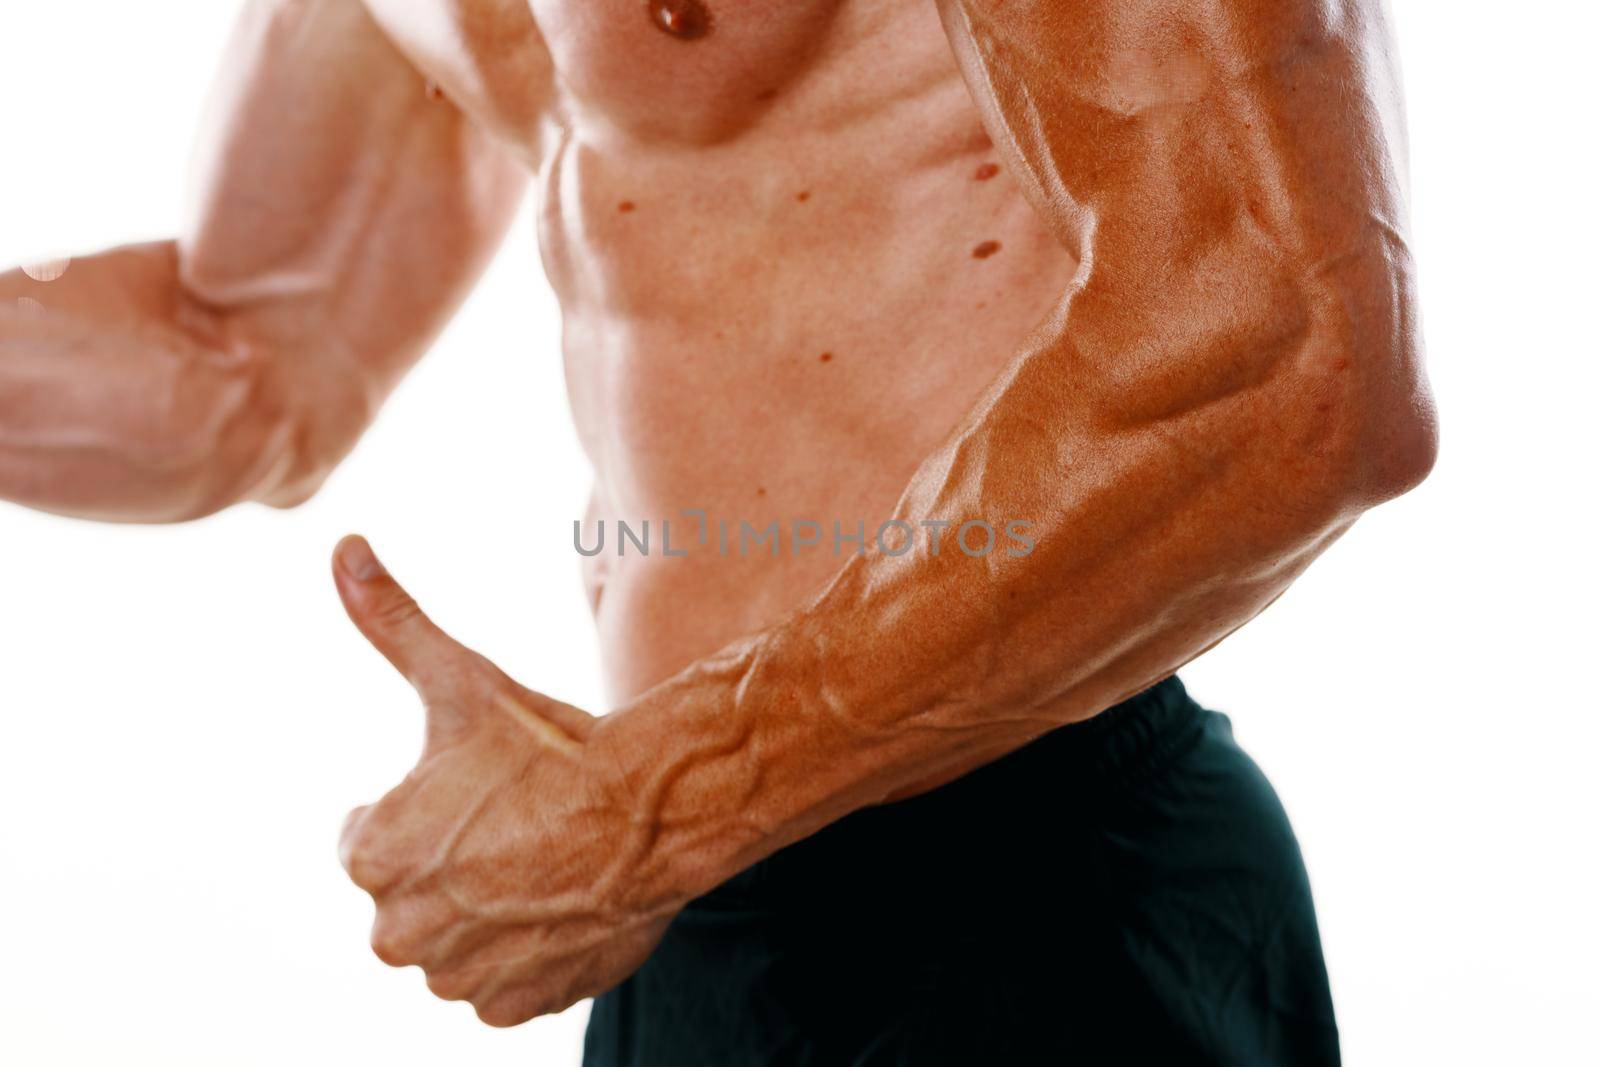 man with a pumped up body muscle closeup workout bodybuilders. High quality photo